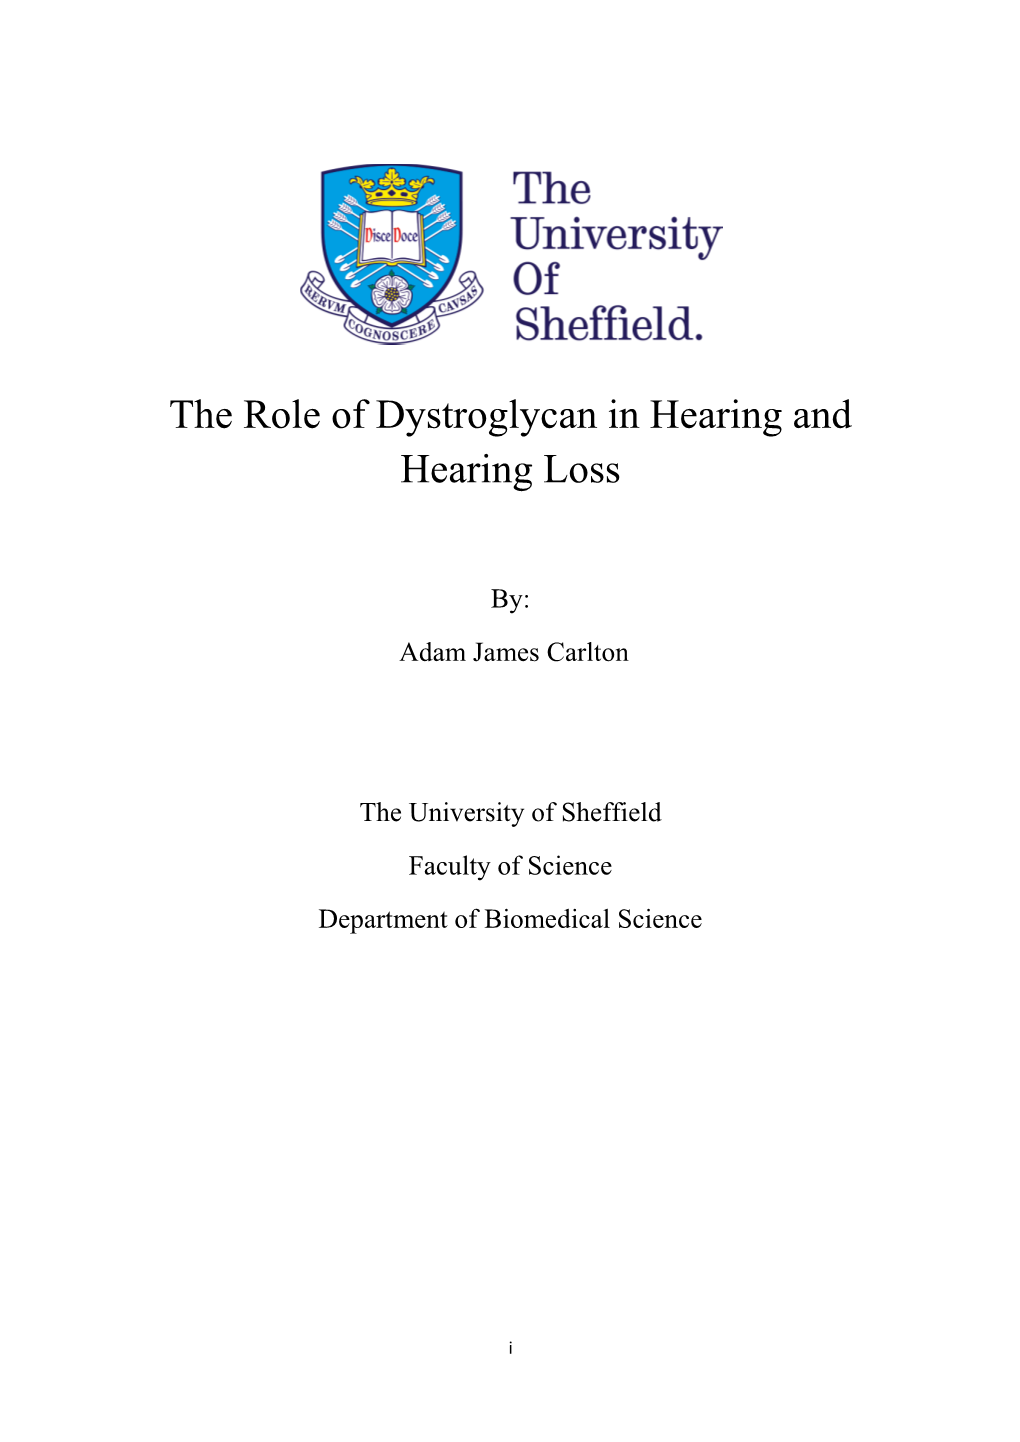 The Role of Dystroglycan in Hearing and Hearing Loss